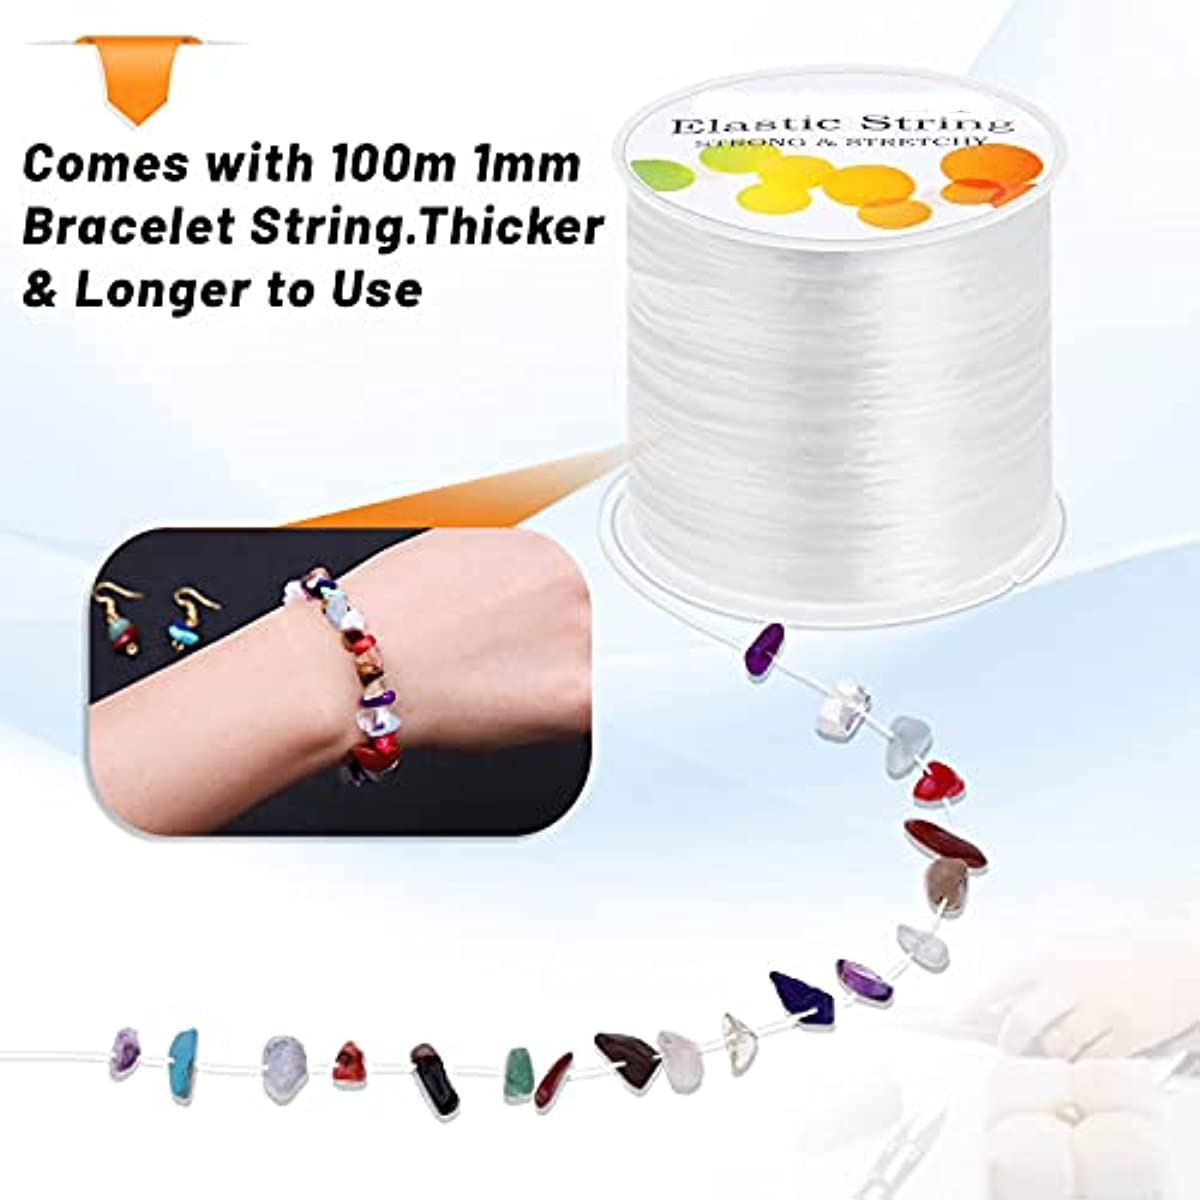 Stretchy String for Bracelets, 4 Rolls 1 mm Sturdy Elastic String Elastic  Cord for Jewelry Making, Necklaces, Beading (2 Black+ 2 White)